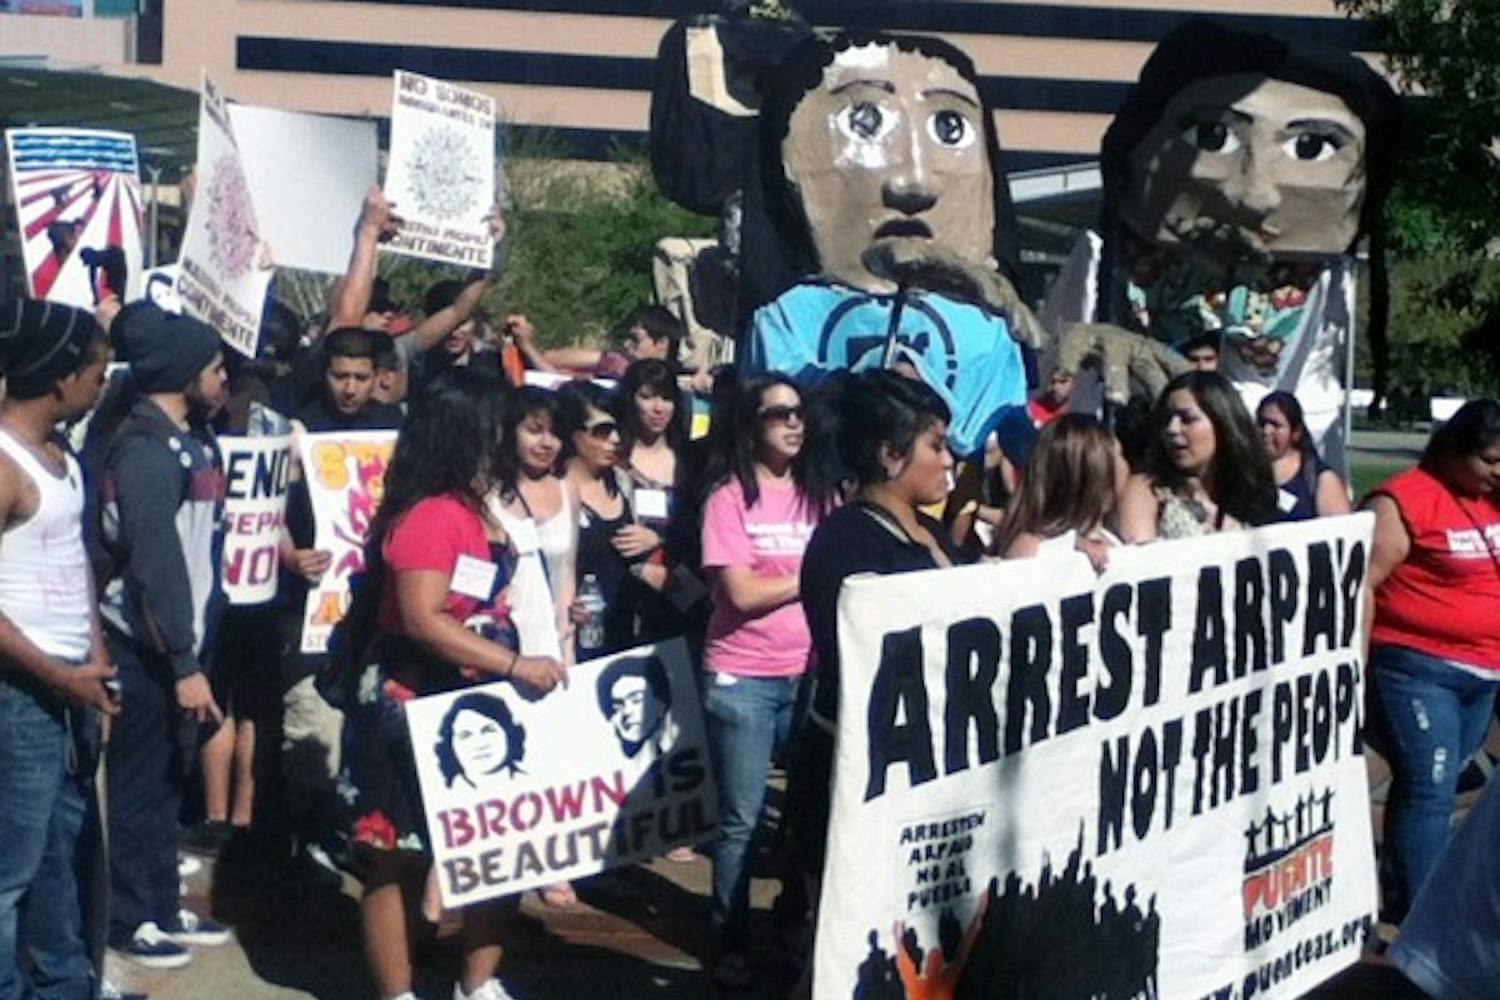 Students from all across the nation gathered on Friday in downtown Phoenix to protest against Maricopa County Sheriff Joe Arpaio’s tactics used to cut down on illegal immigration. (Photo courtesy of Daisy Prado)